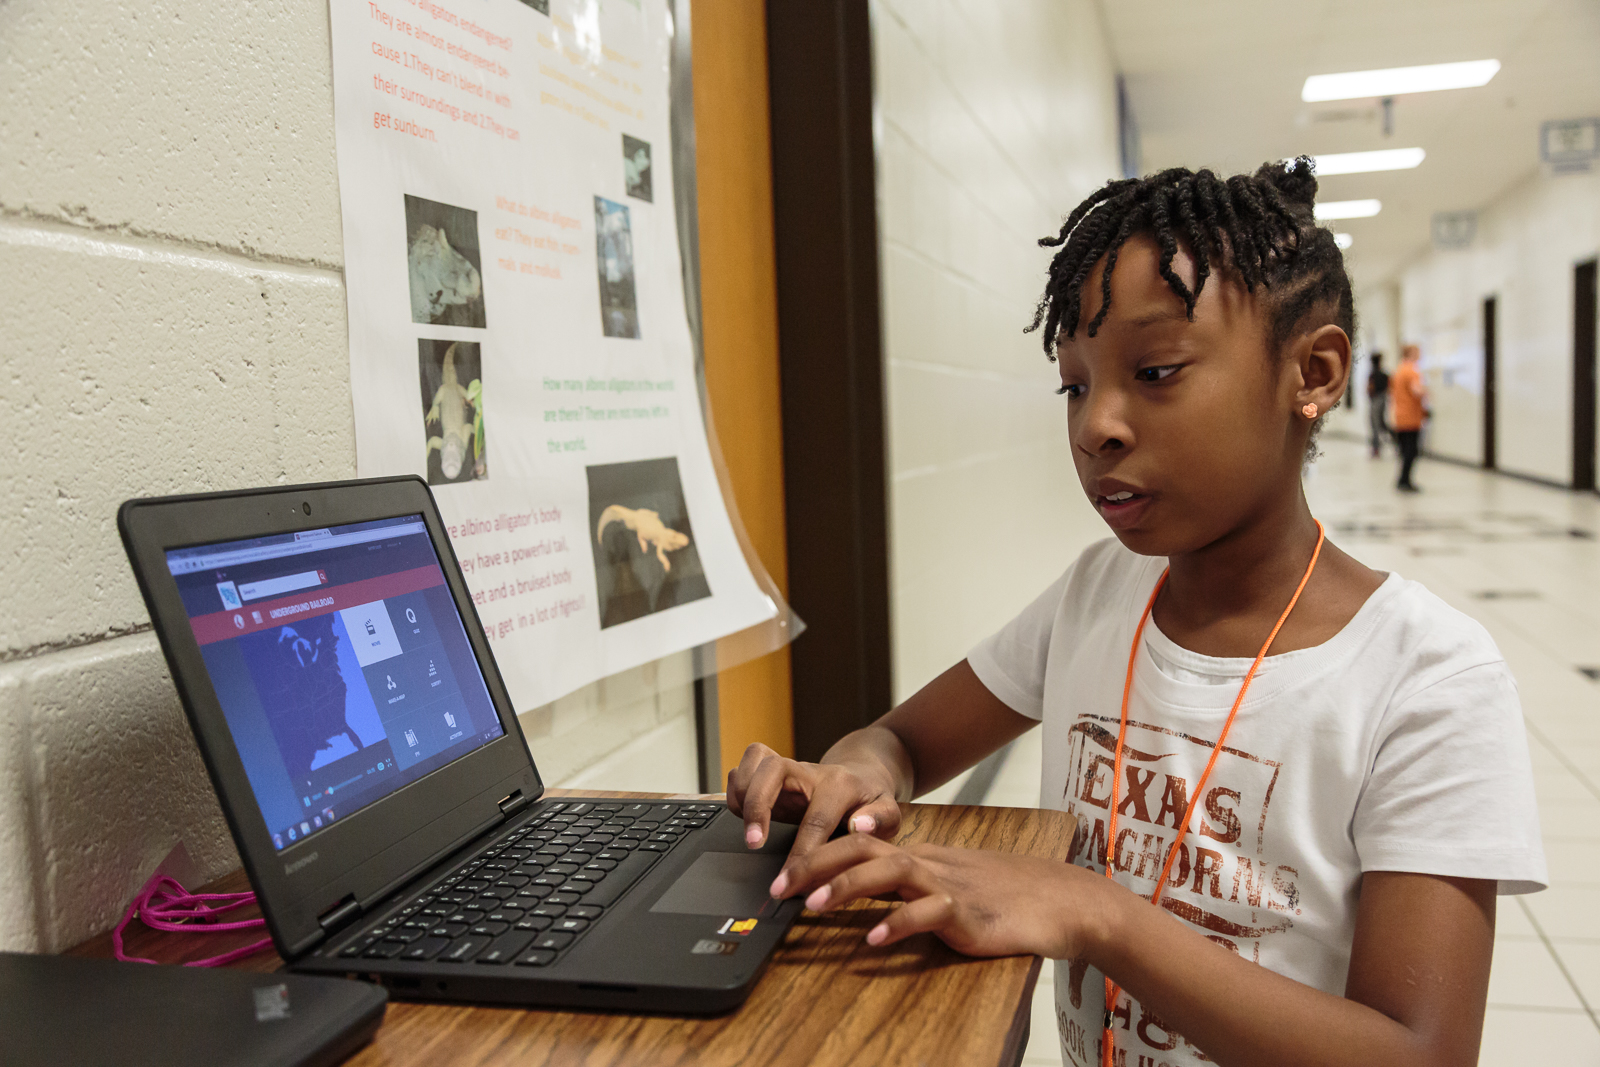    Corey,    a 3rd grade and history enthusiast, enjoyed researching her project on the Underground Railroad. “What I enjoyed most was finding the information with the books and with the BrainPop video because I really like learning about history.” s